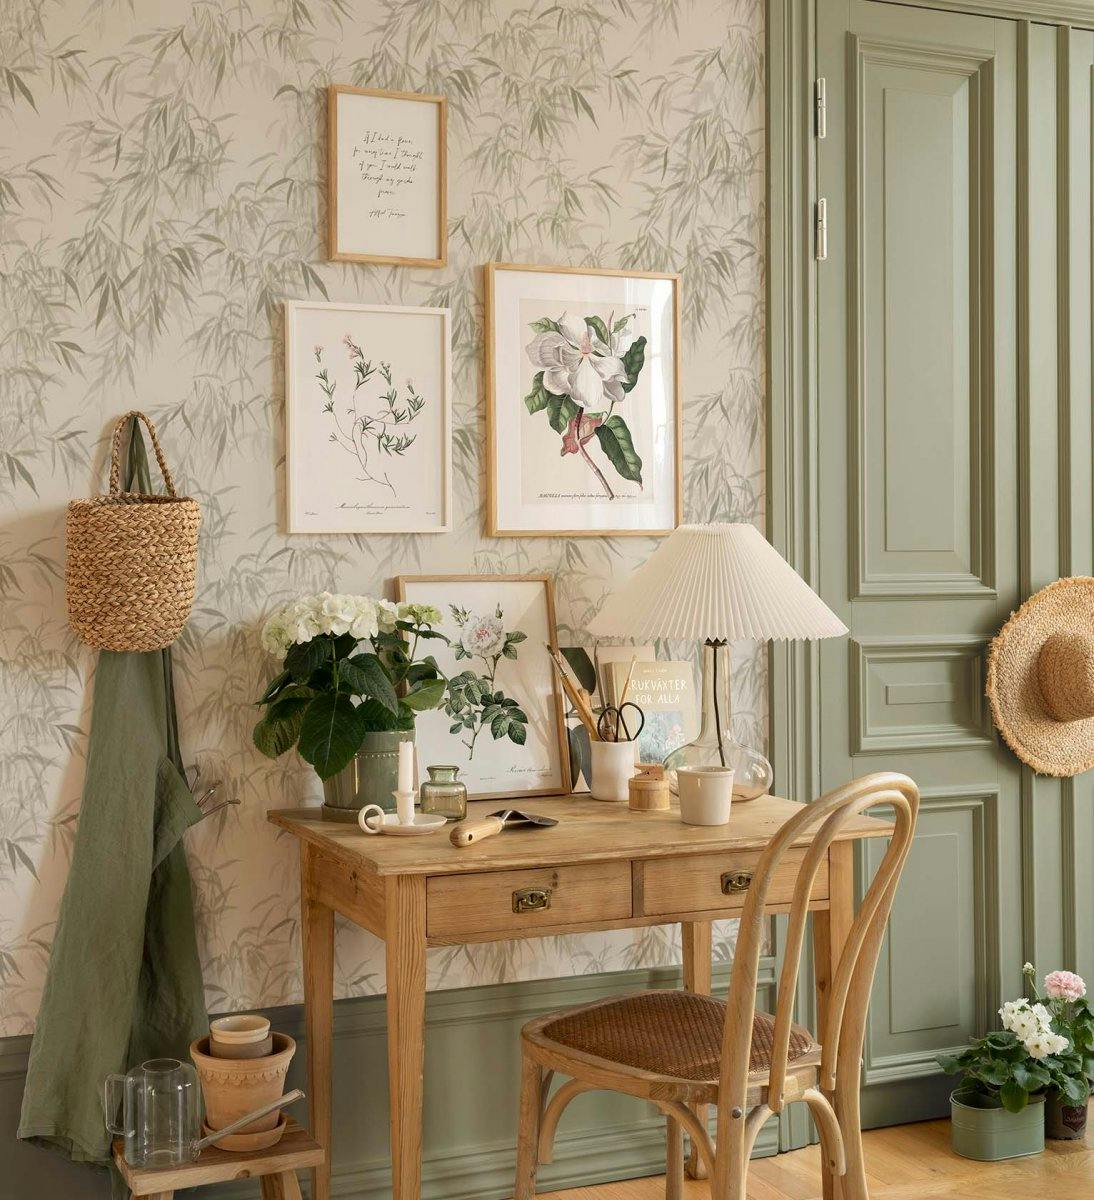 Botanical gallery wall theme for the home office